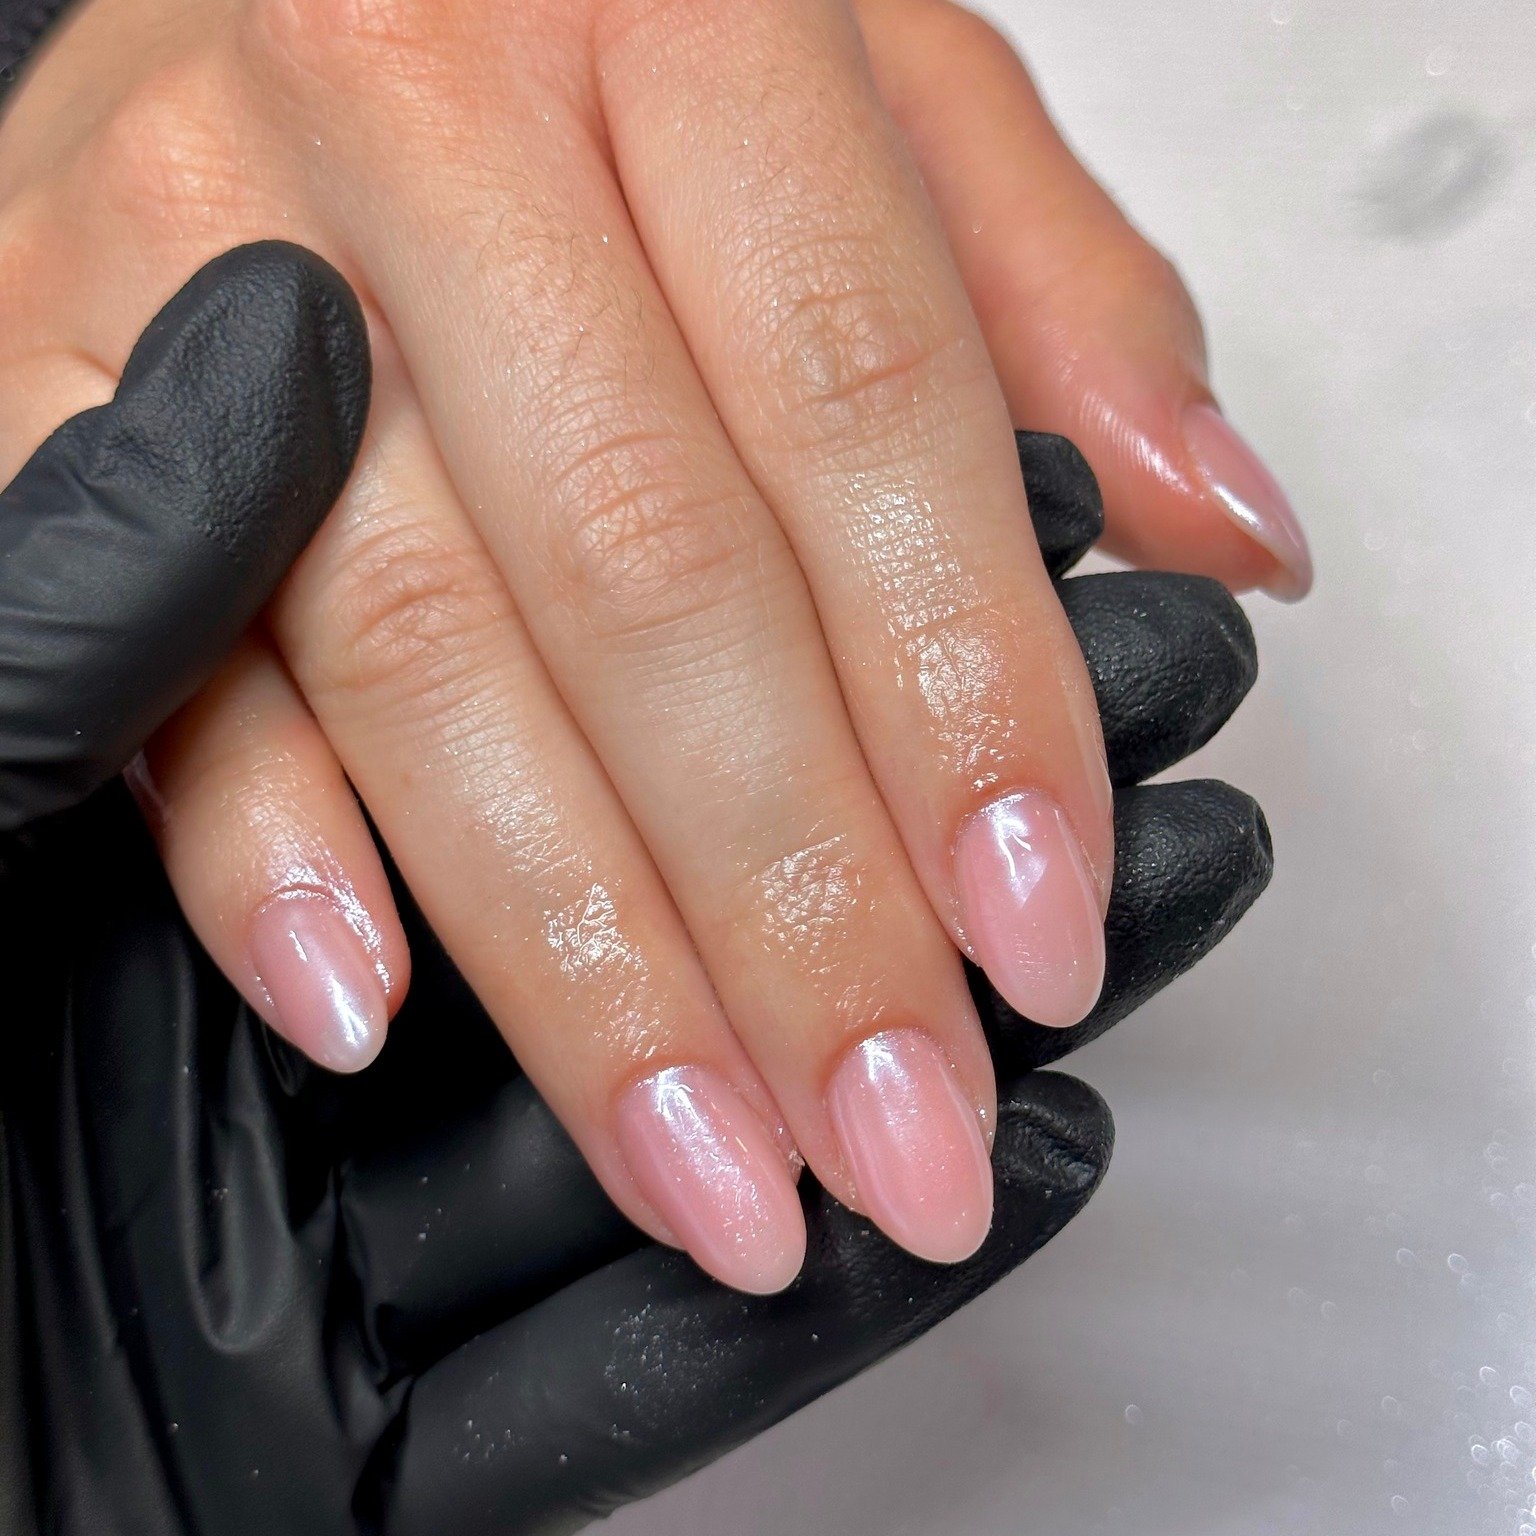 Natural nails will always be popular🤎

Using @the_gelbottle_inc marshmallow and @essenceglitter white chrome.

 #nails #summernails #nailinspo #nailartist #summernails💅 #biab #biabnails #biabgel #chrome #chromenails #holidaynails #nailsart #nailsta